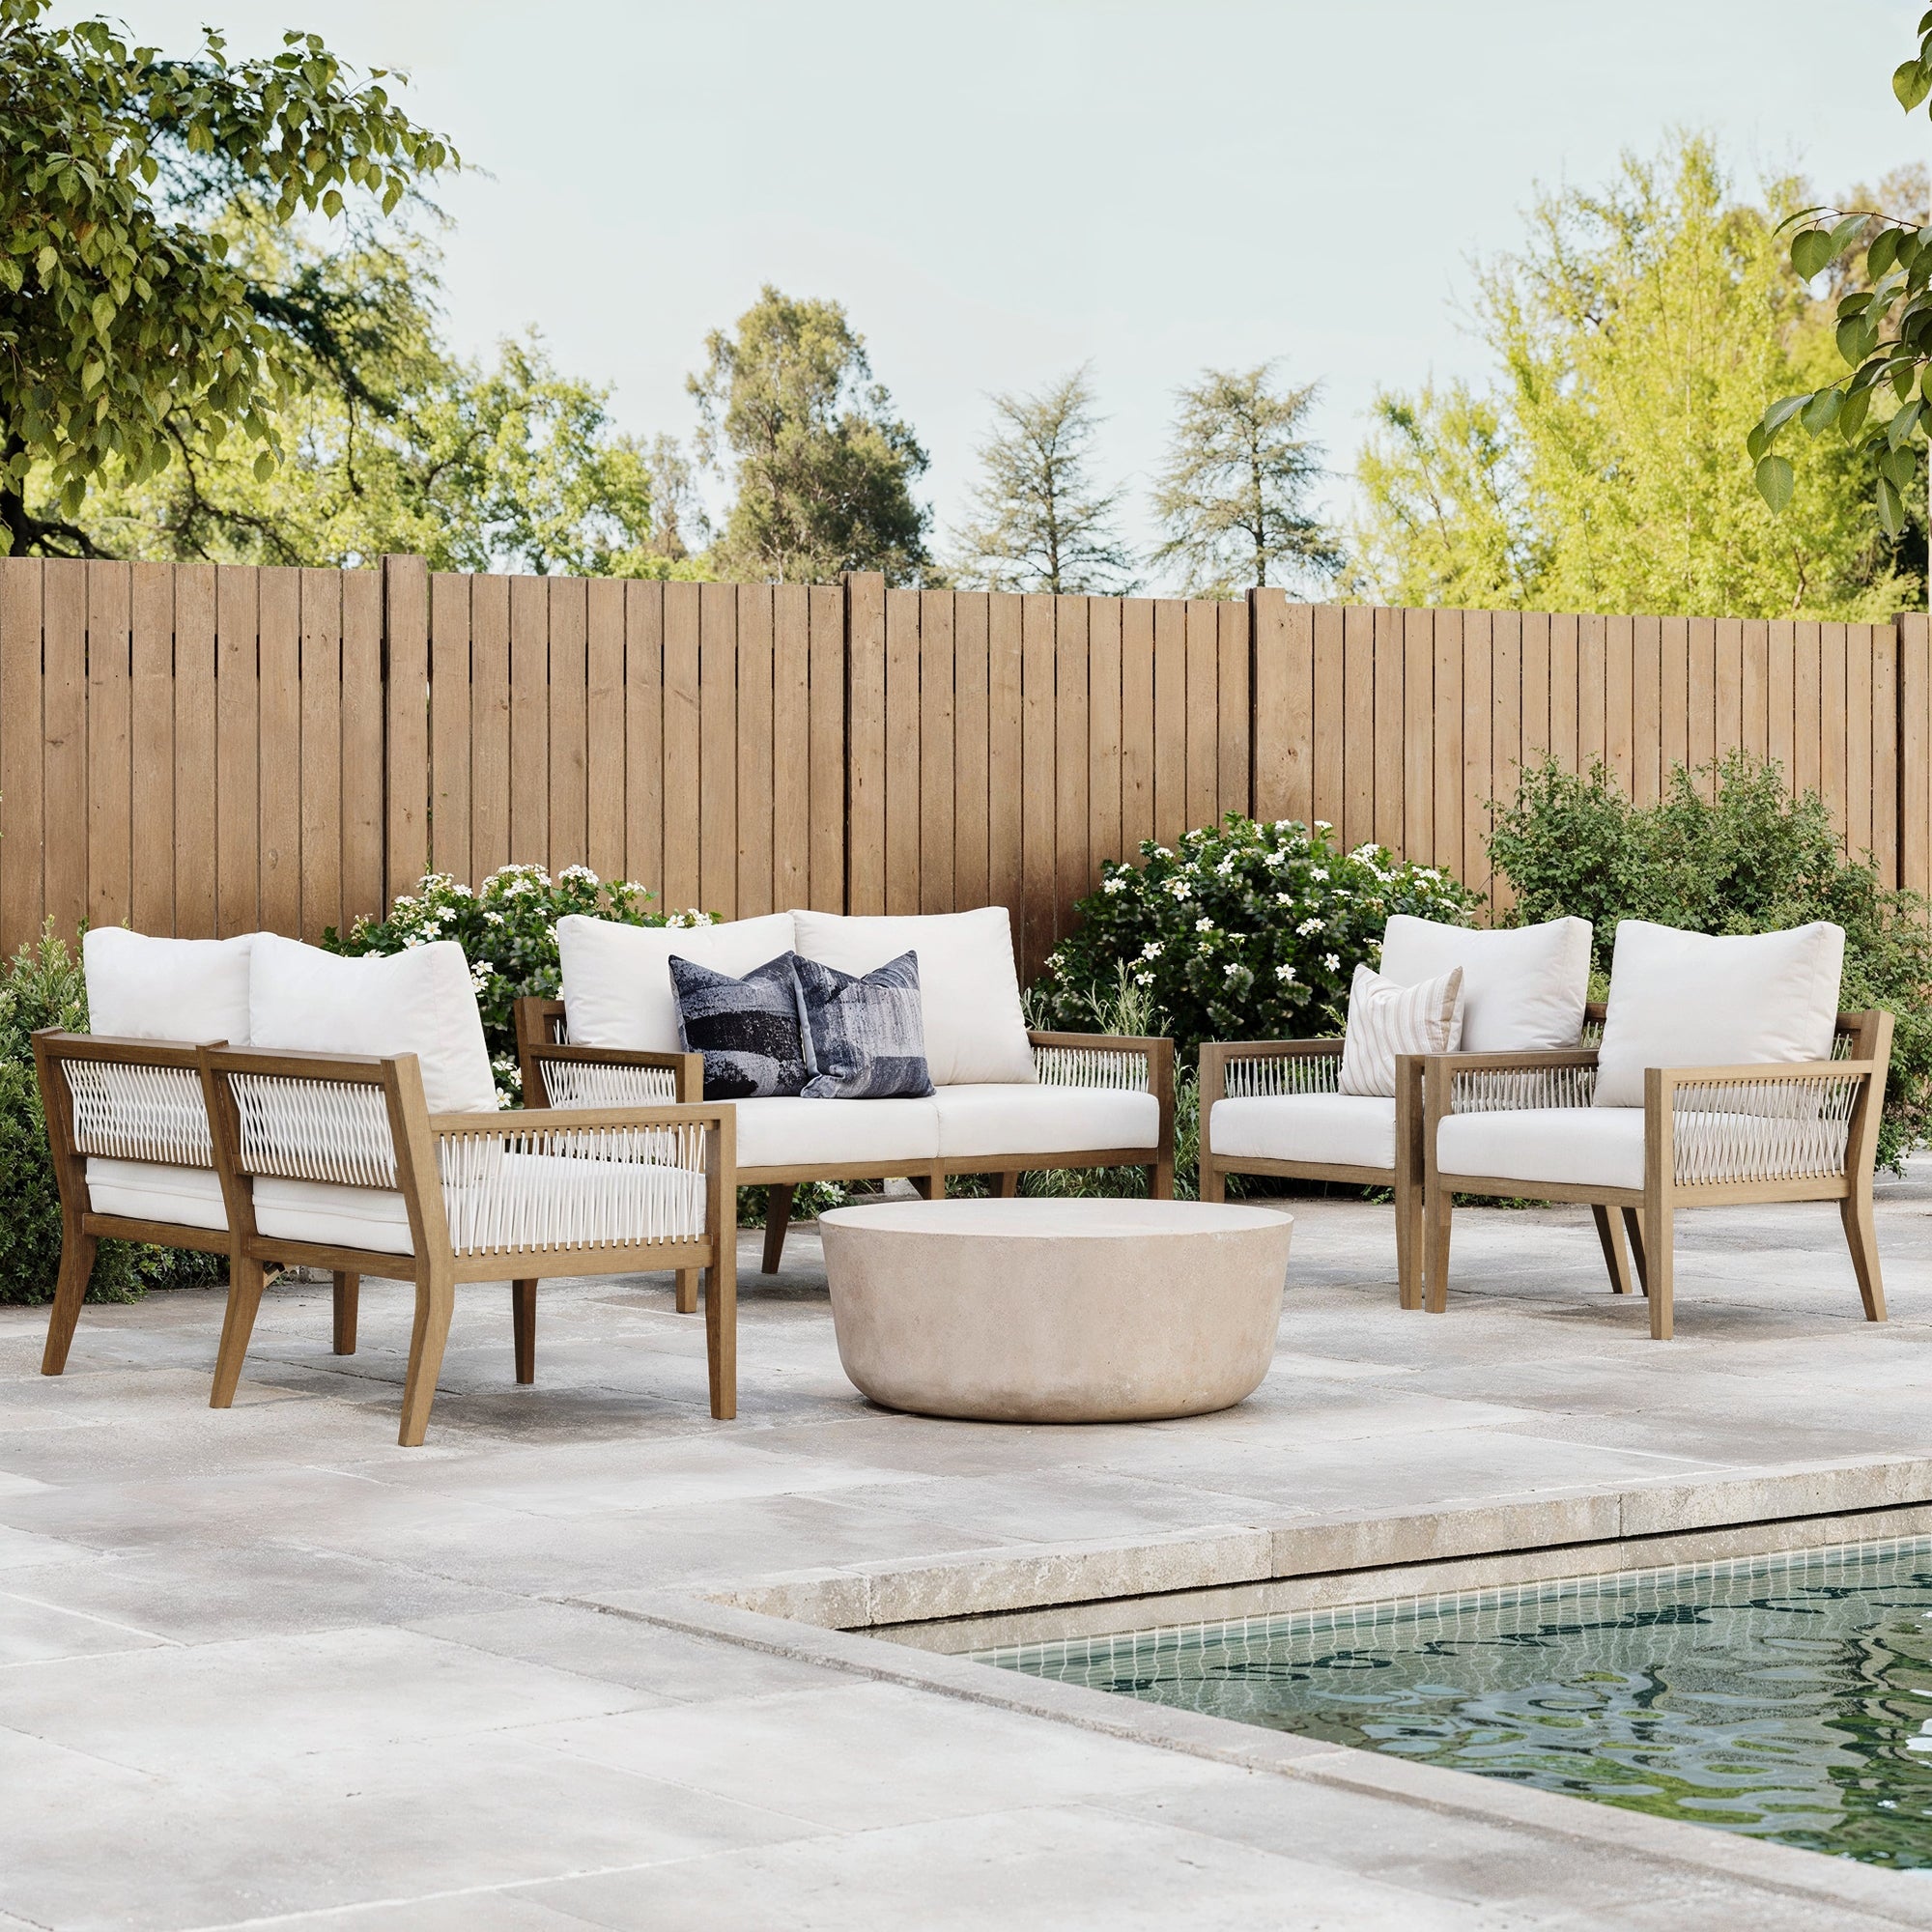 Set of 2 Outdoor Loveseats & 2 Chairs White